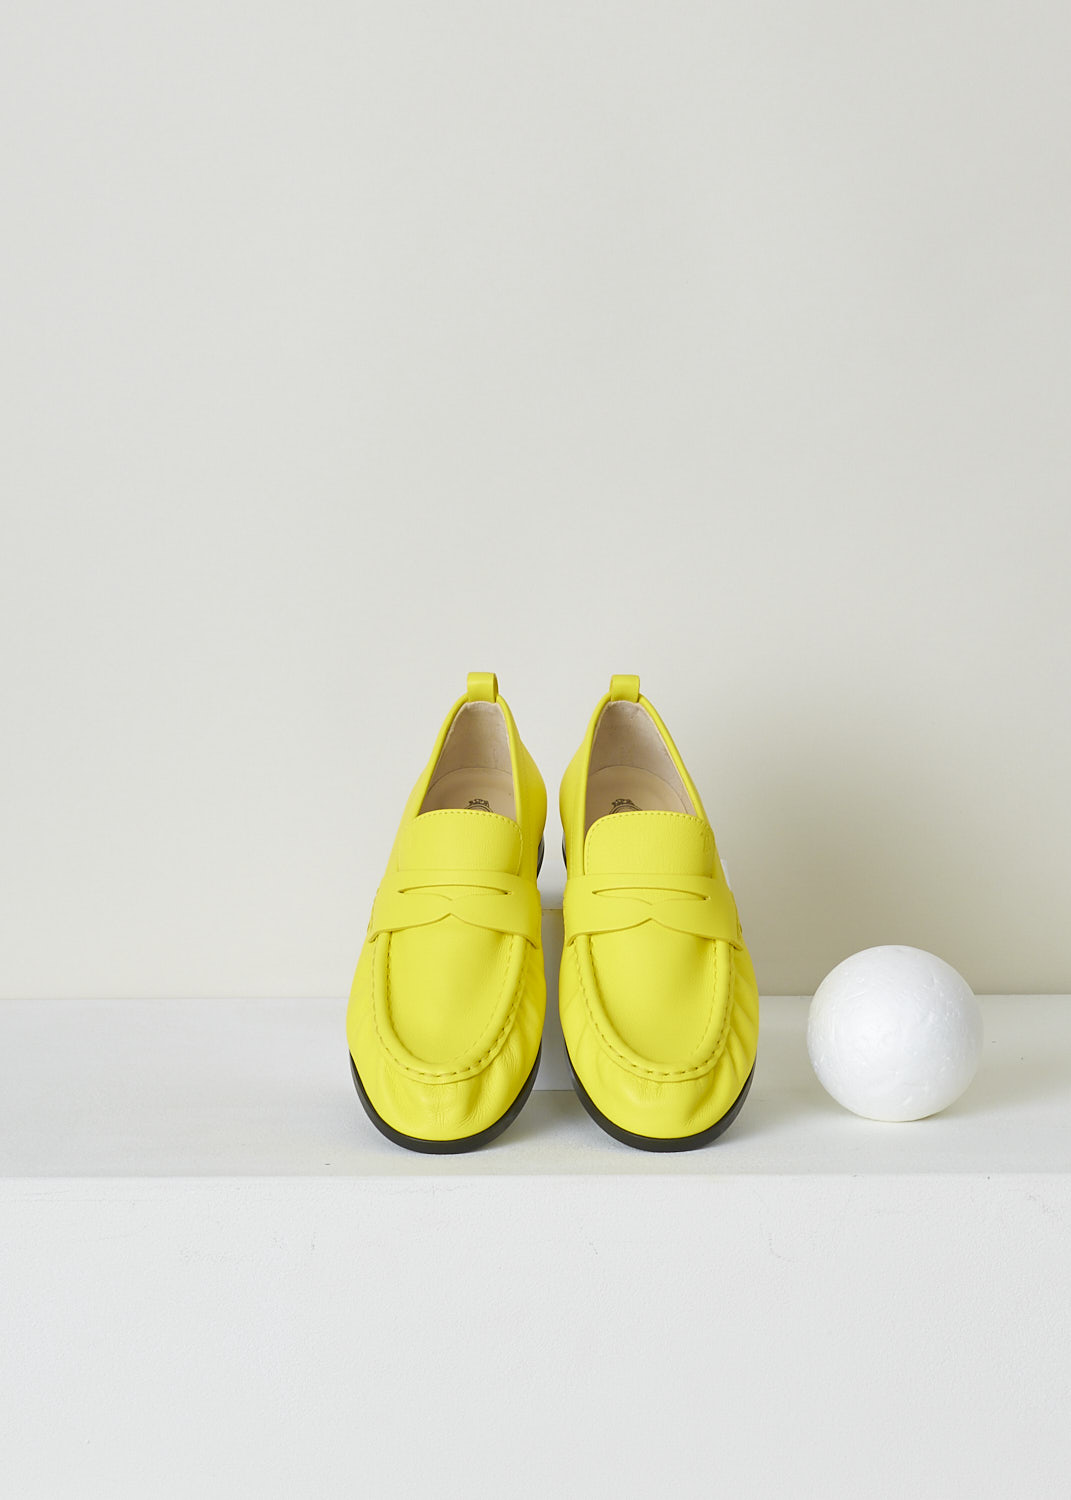 TODS, BRIGHT YELLOW PENNY LOAFERS, XXW02E0EC60PHXG009_PHX_HOLIDAY, Yellow, Top, These bright yellow slip-on penny loafers have a rounded toe and a decorative slotted leather strip over the upper side. Around the trim, the leather is subtly pleated. These loafers have black soles.
